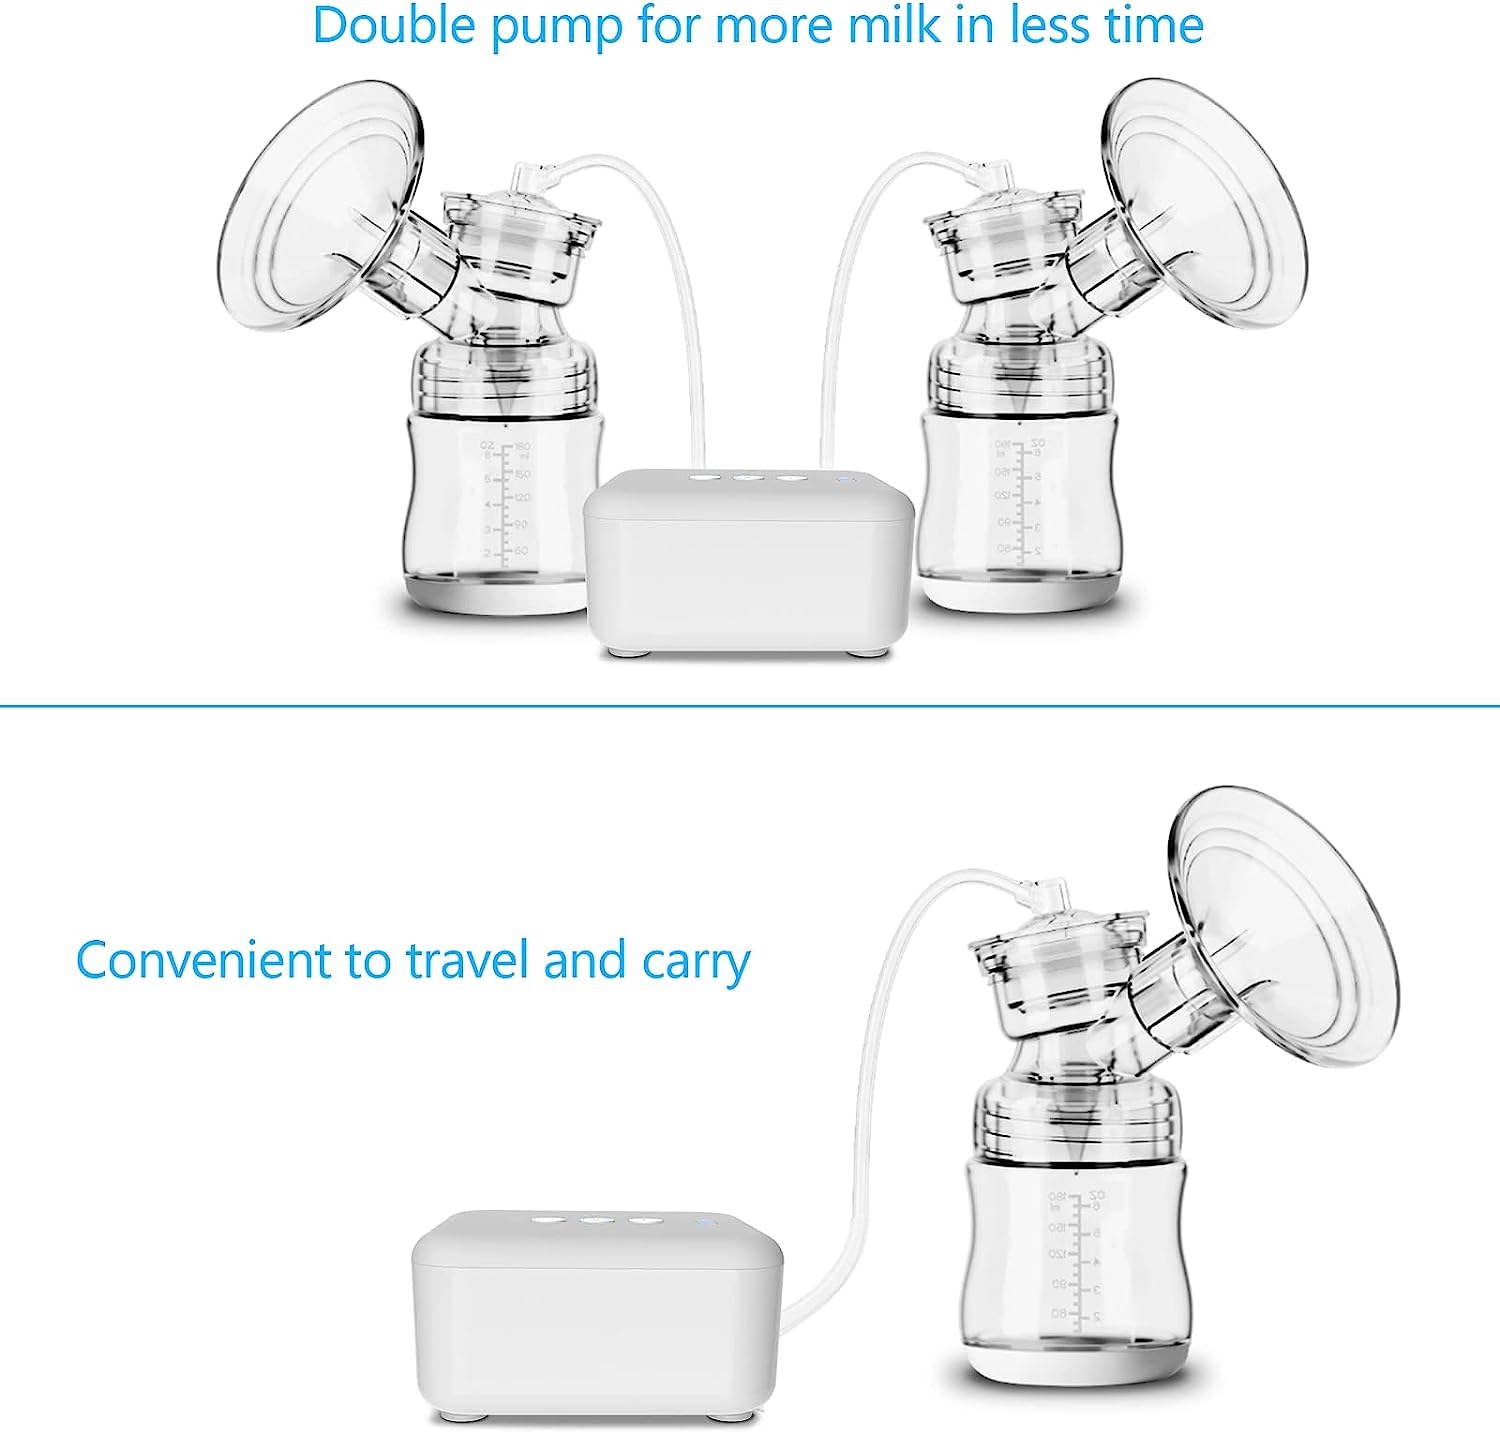 Double Electric Breast Pump, Breastfeeding Pump with 2 Size Flanges19m –  Lulia